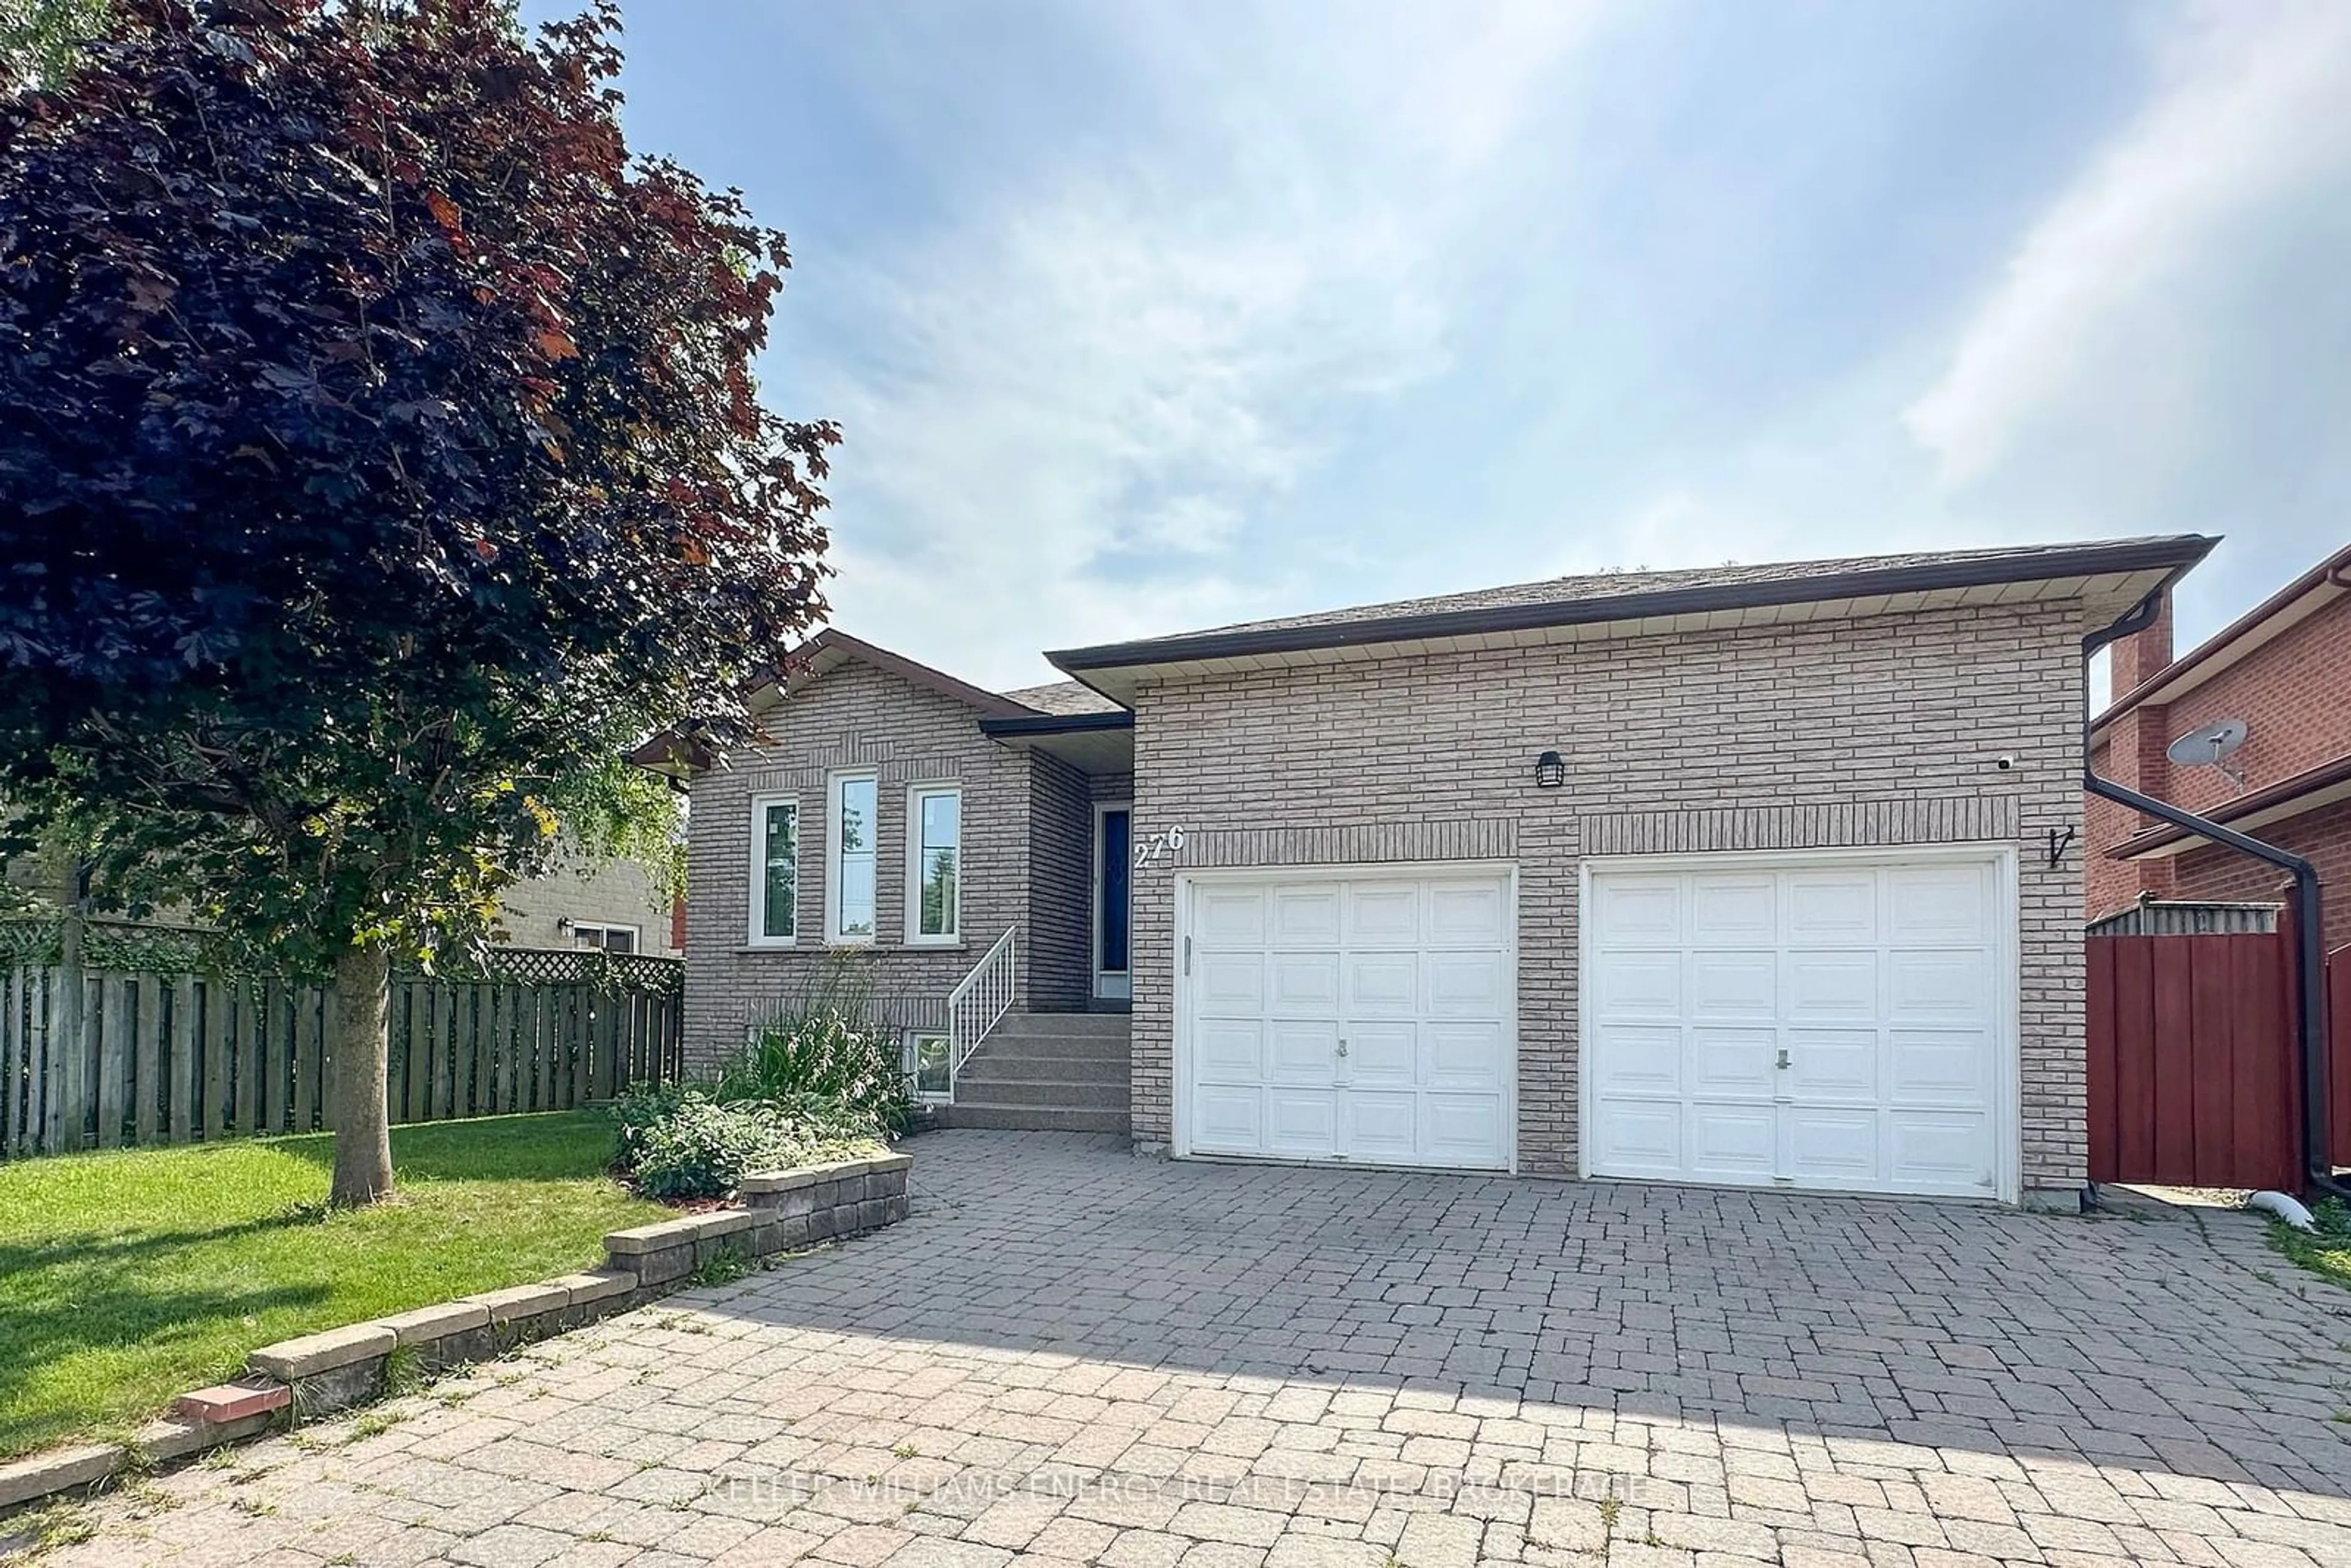 Home with brick exterior material for 276 Thornton Rd, Oshawa Ontario L1J 6T7